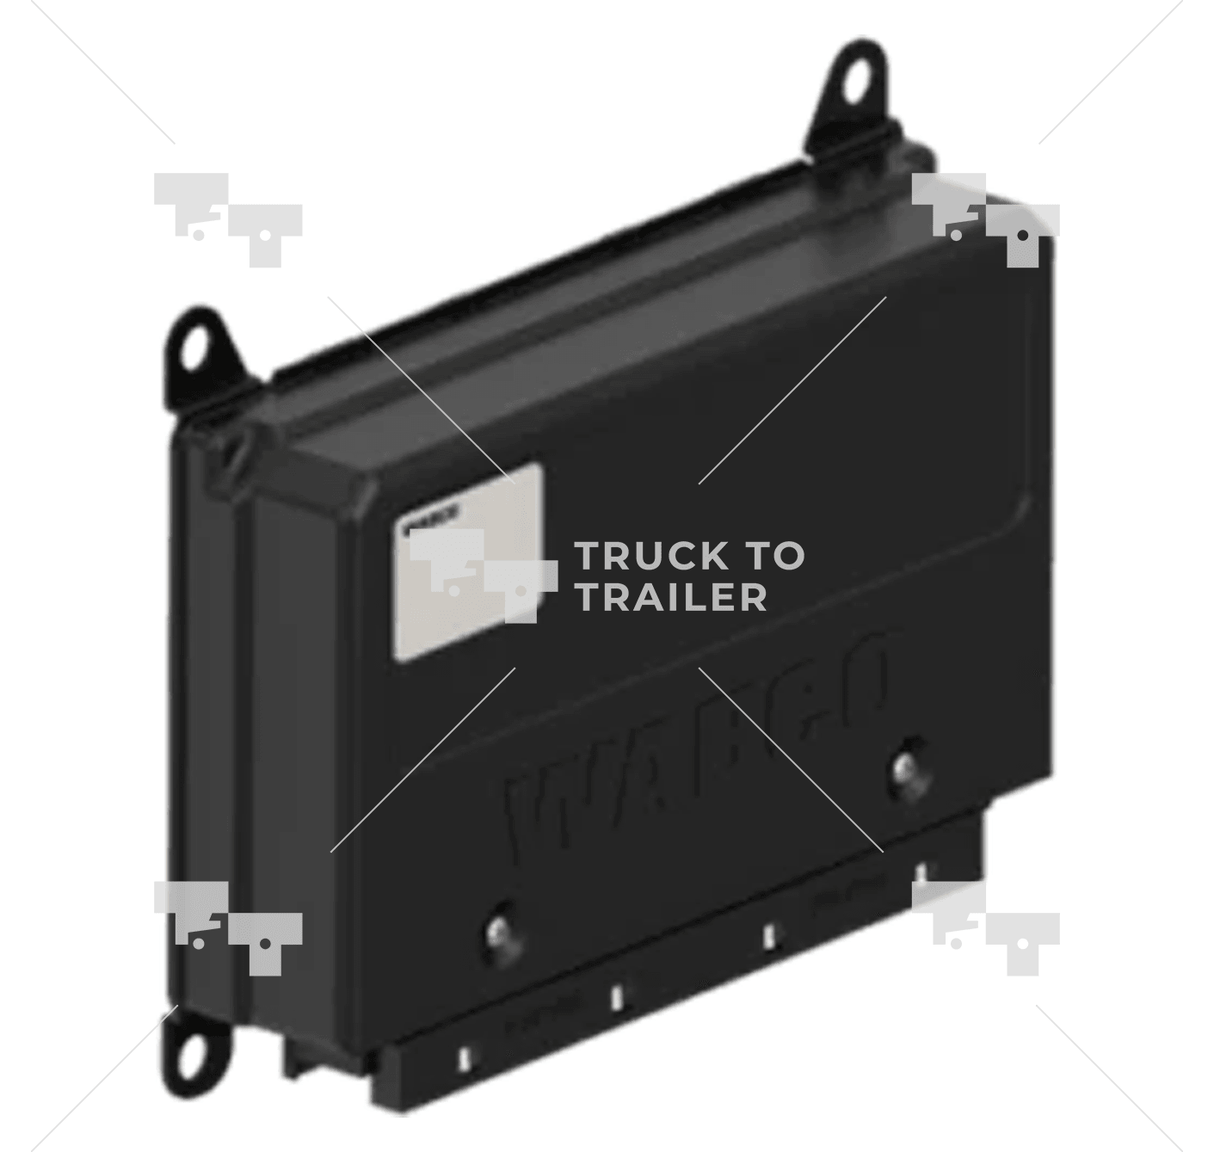 4008670090 Genuine Meritor Wabco Tractor Pabs Electronic Control Unit Cab Mount - Truck To Trailer